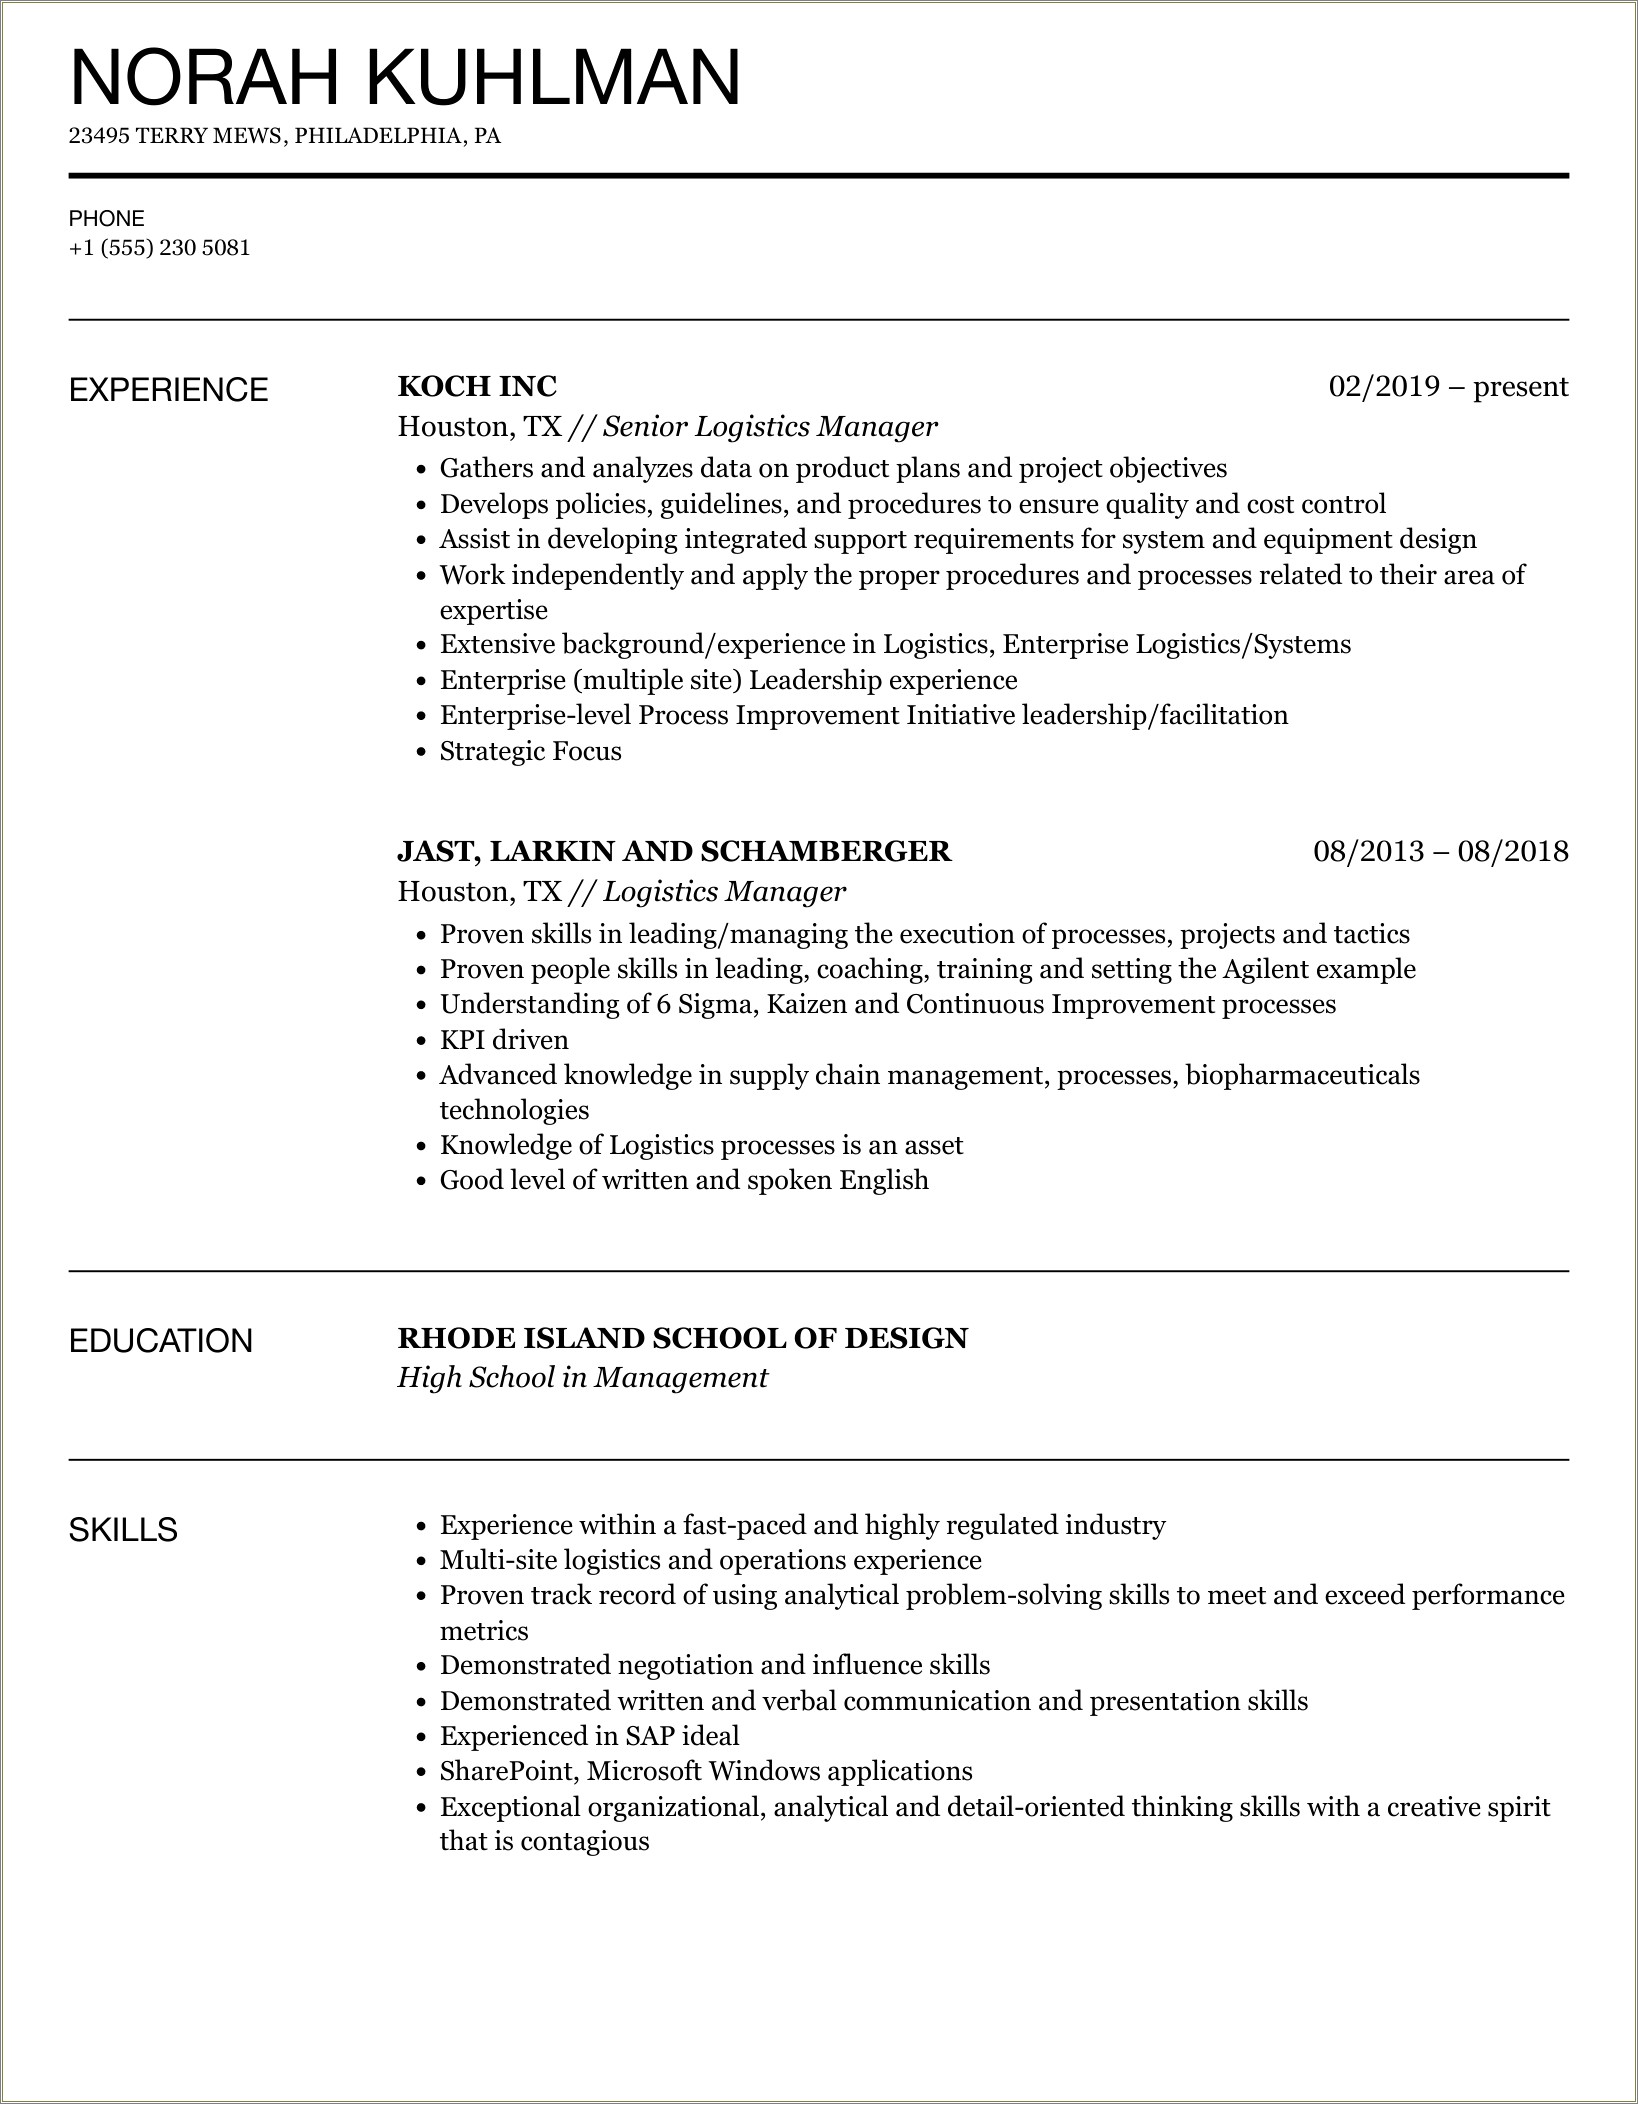 2018 Account Manager Resume Samples From 3pl Companies